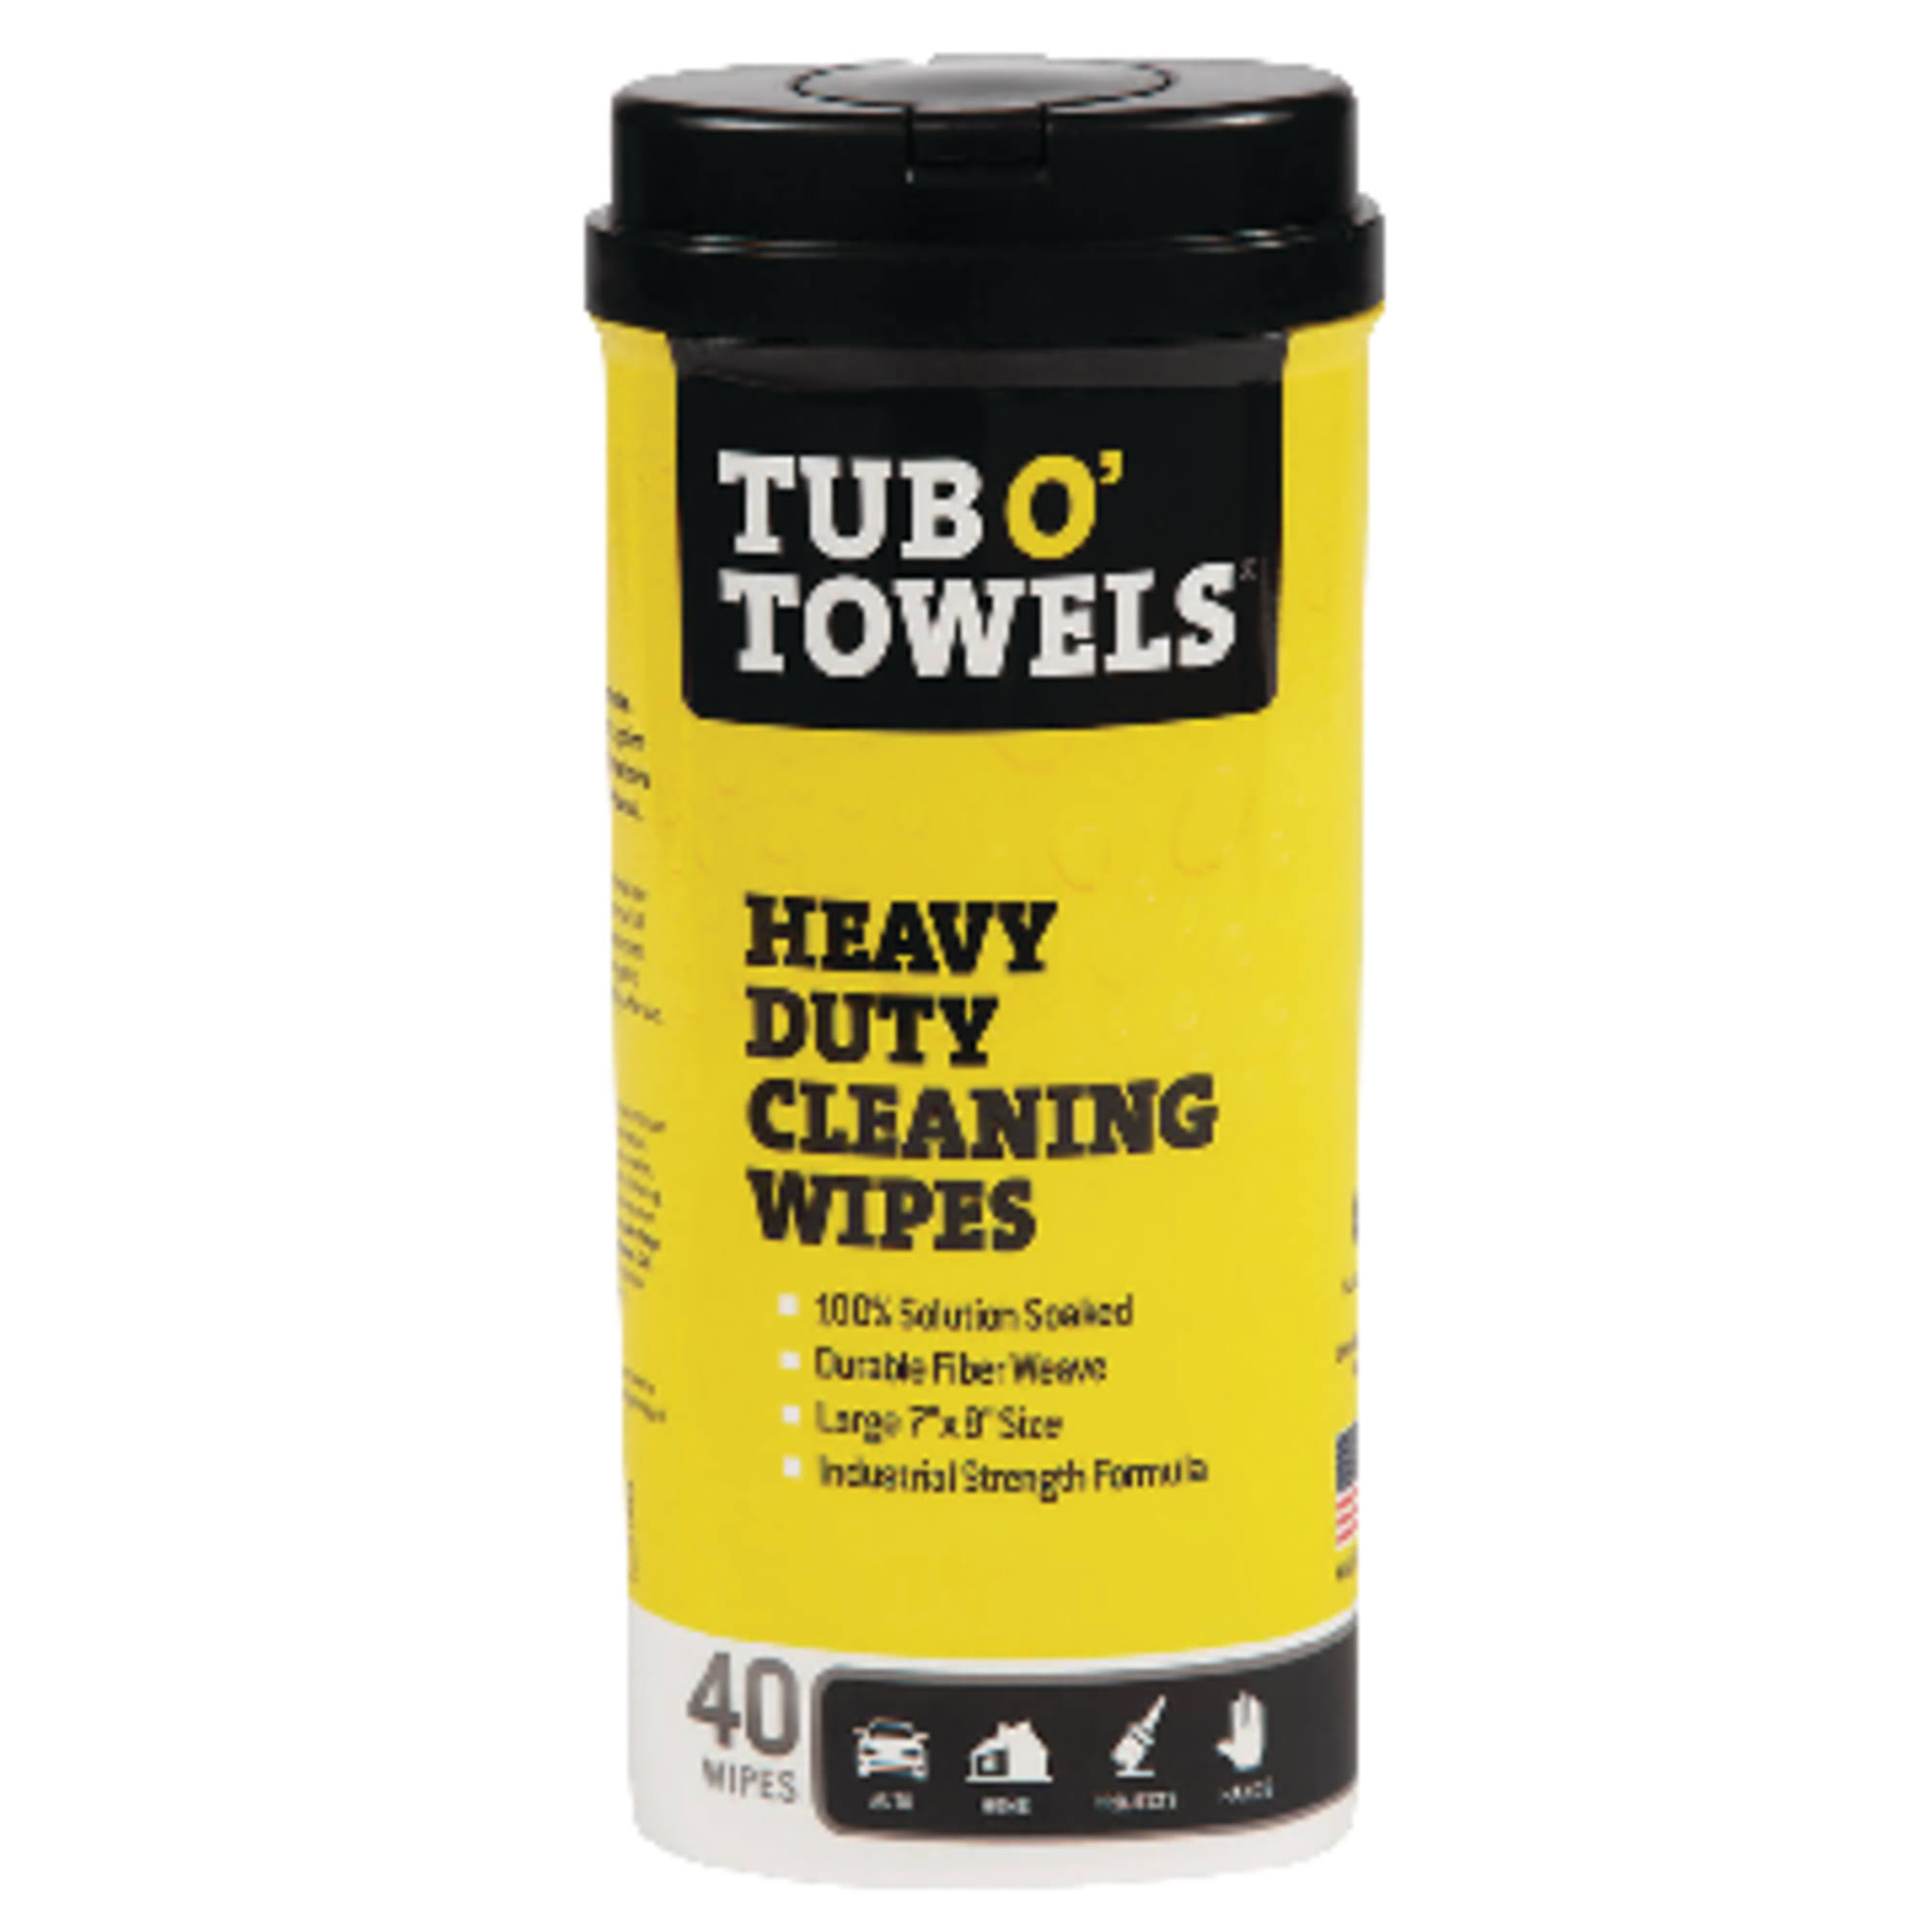 Tub O Towels Heavy-Duty Size Multi-Surface Cleaning Wipes - 40 Wipes